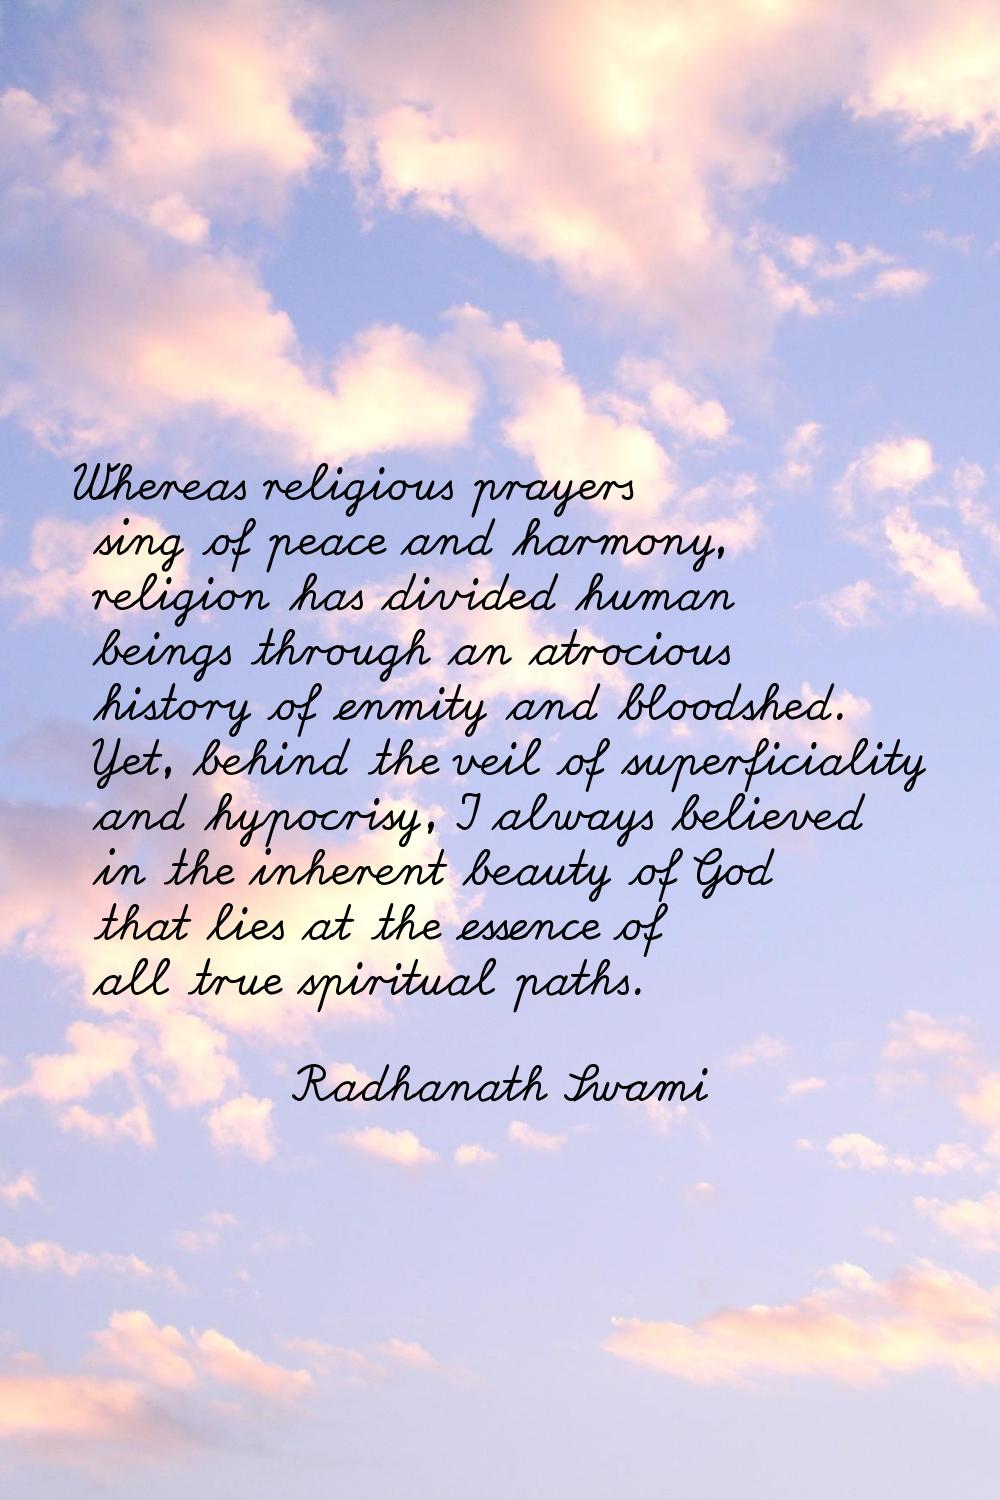 Whereas religious prayers sing of peace and harmony, religion has divided human beings through an a